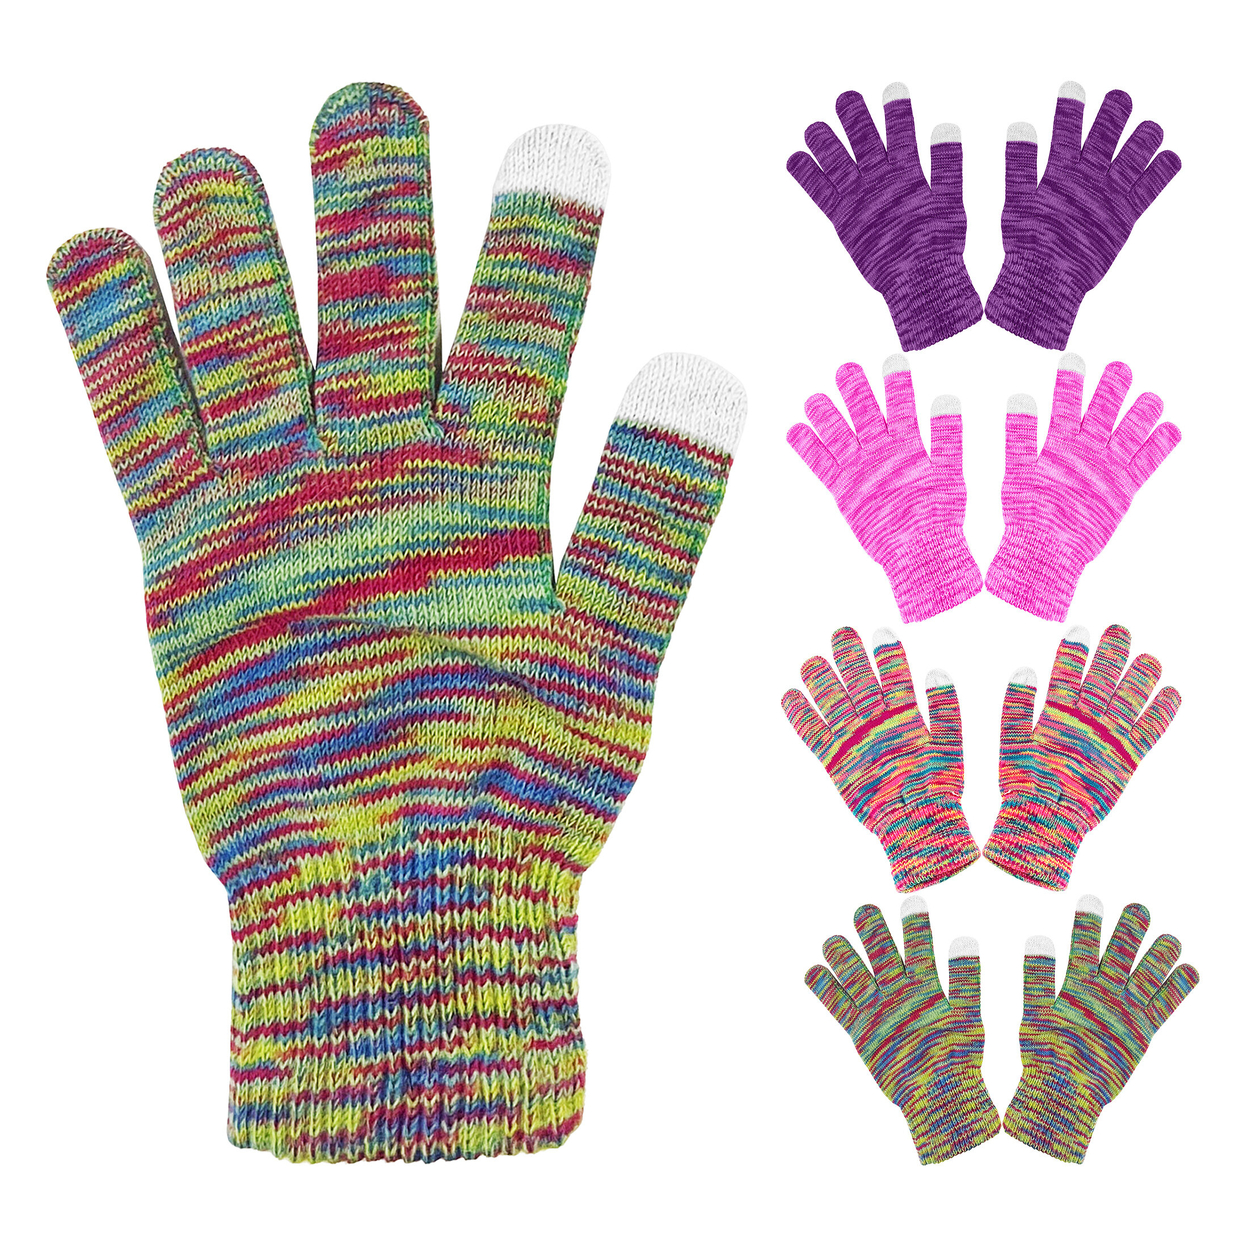 3-Pairs: Women's Winter Warm Soft Knit Touchscreen Multi-Tone Texting Gloves